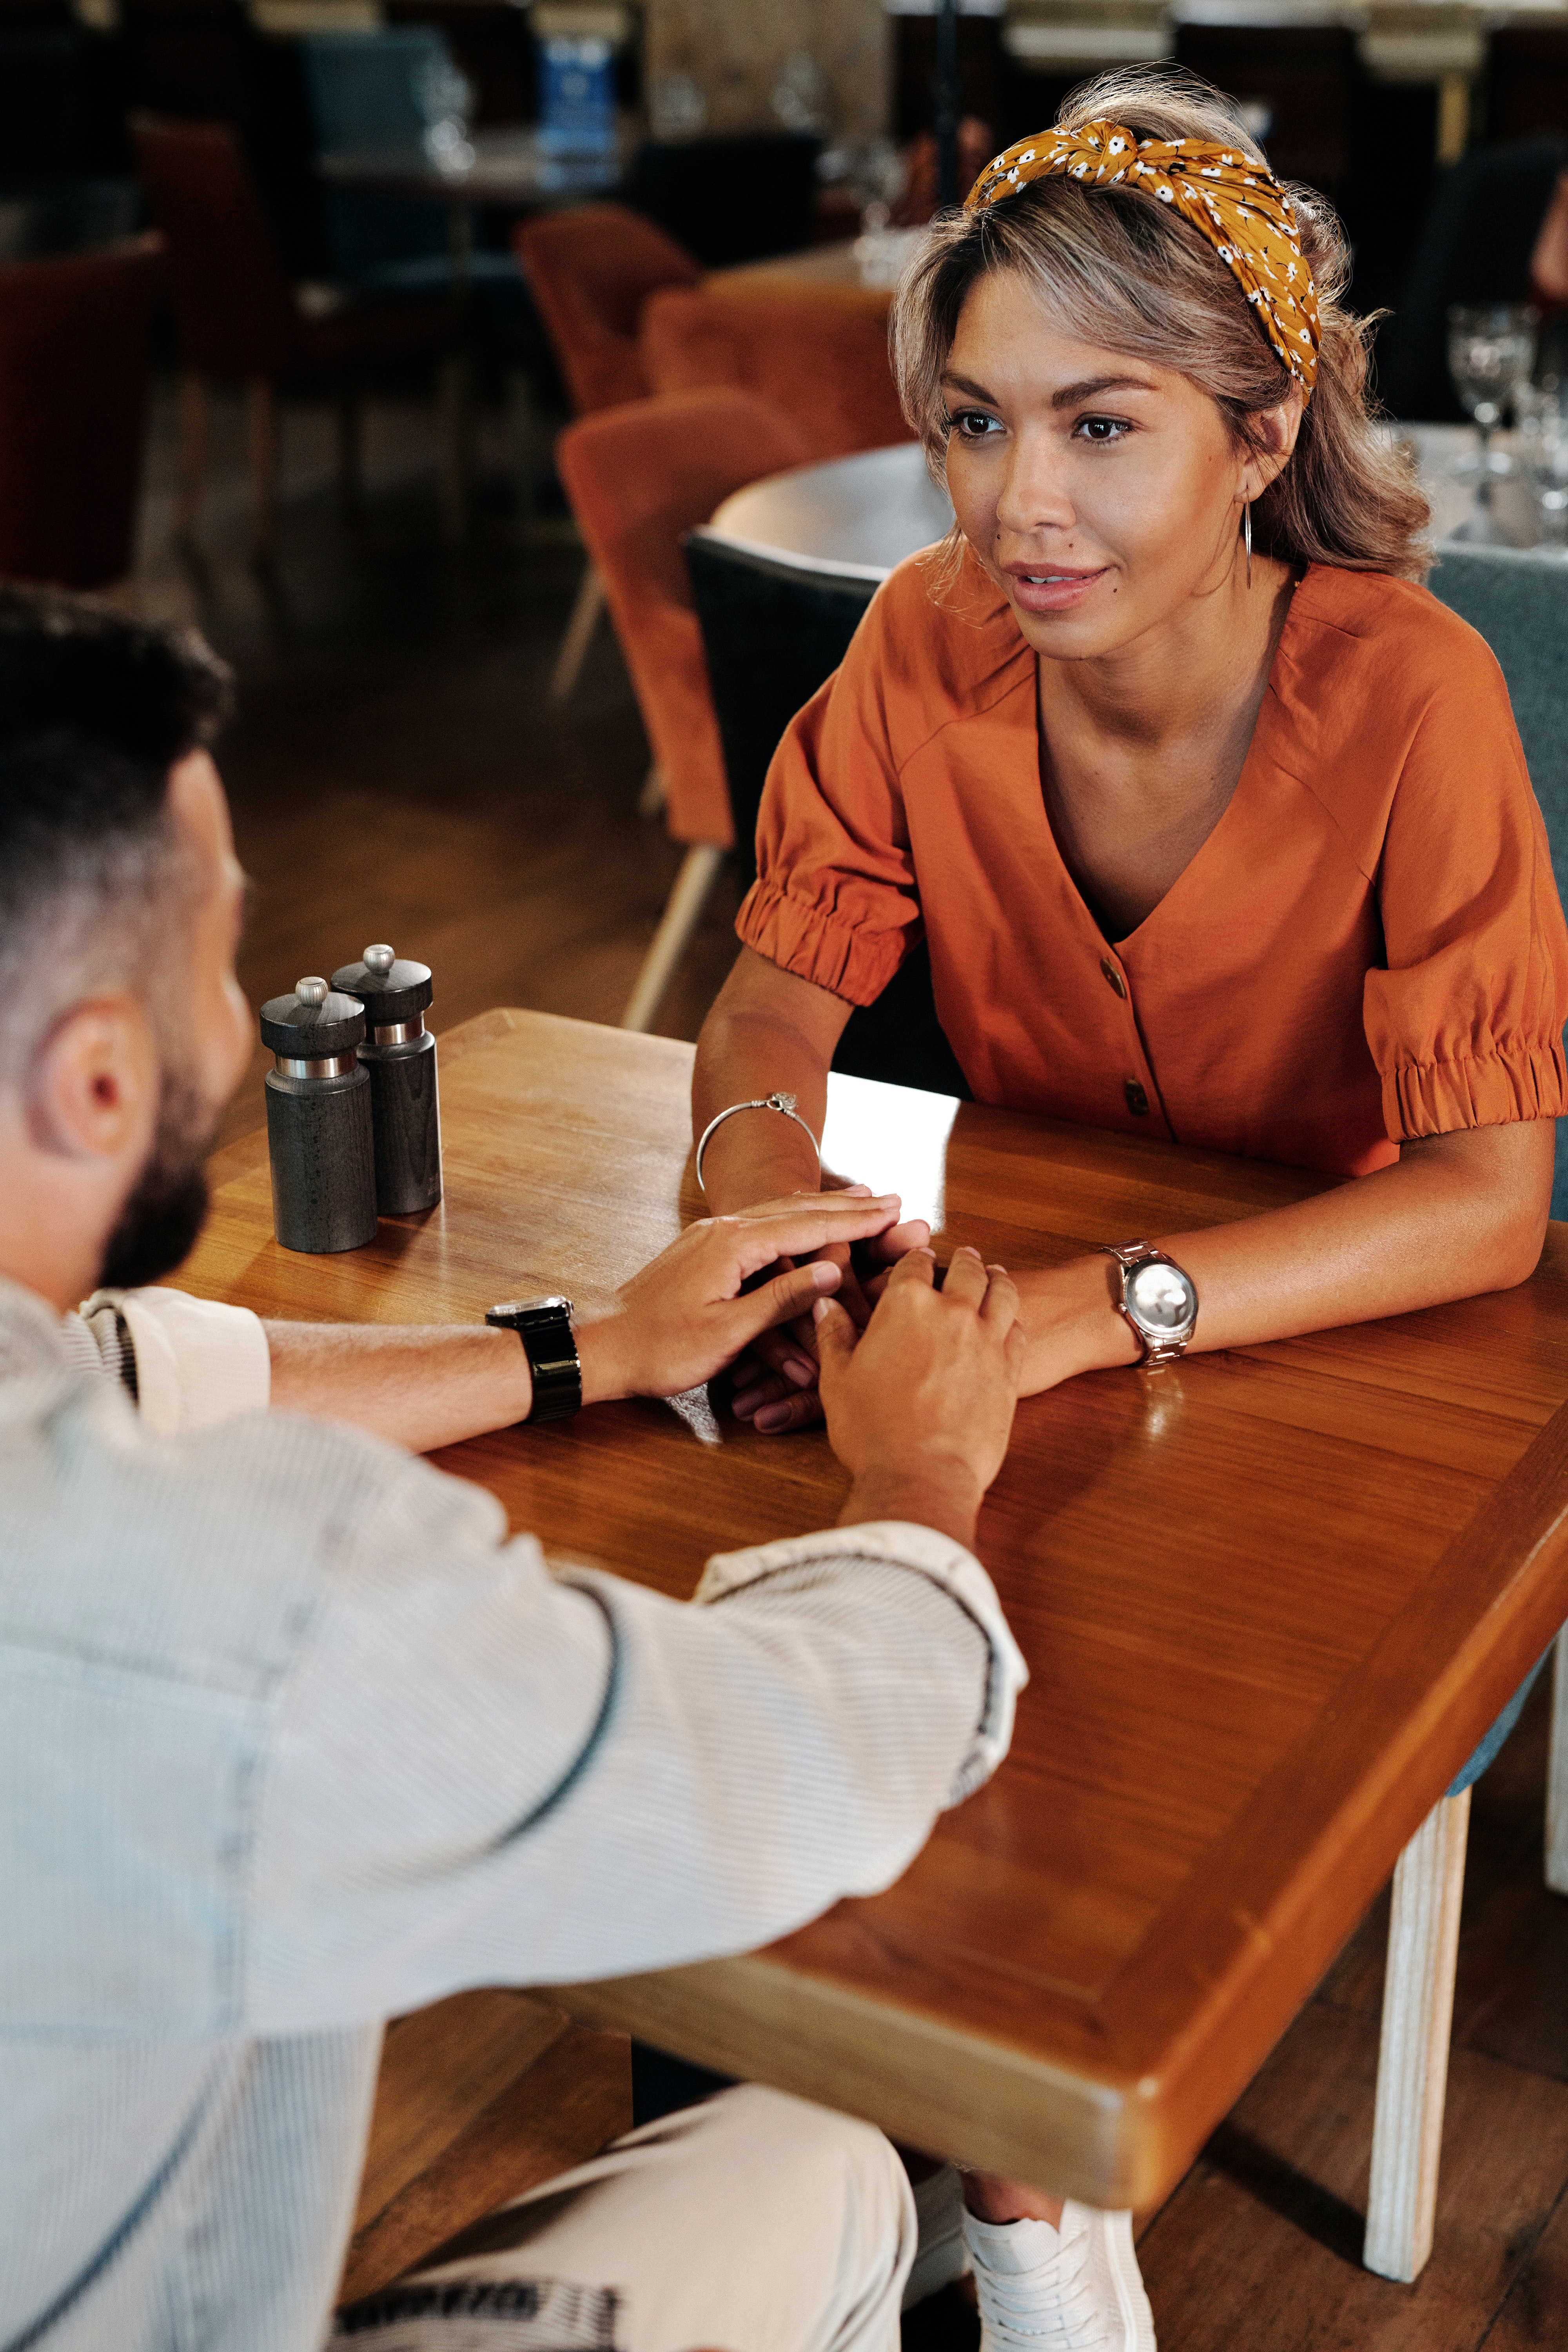 A man and a woman holding hands at a restaurant | Source: Pexels